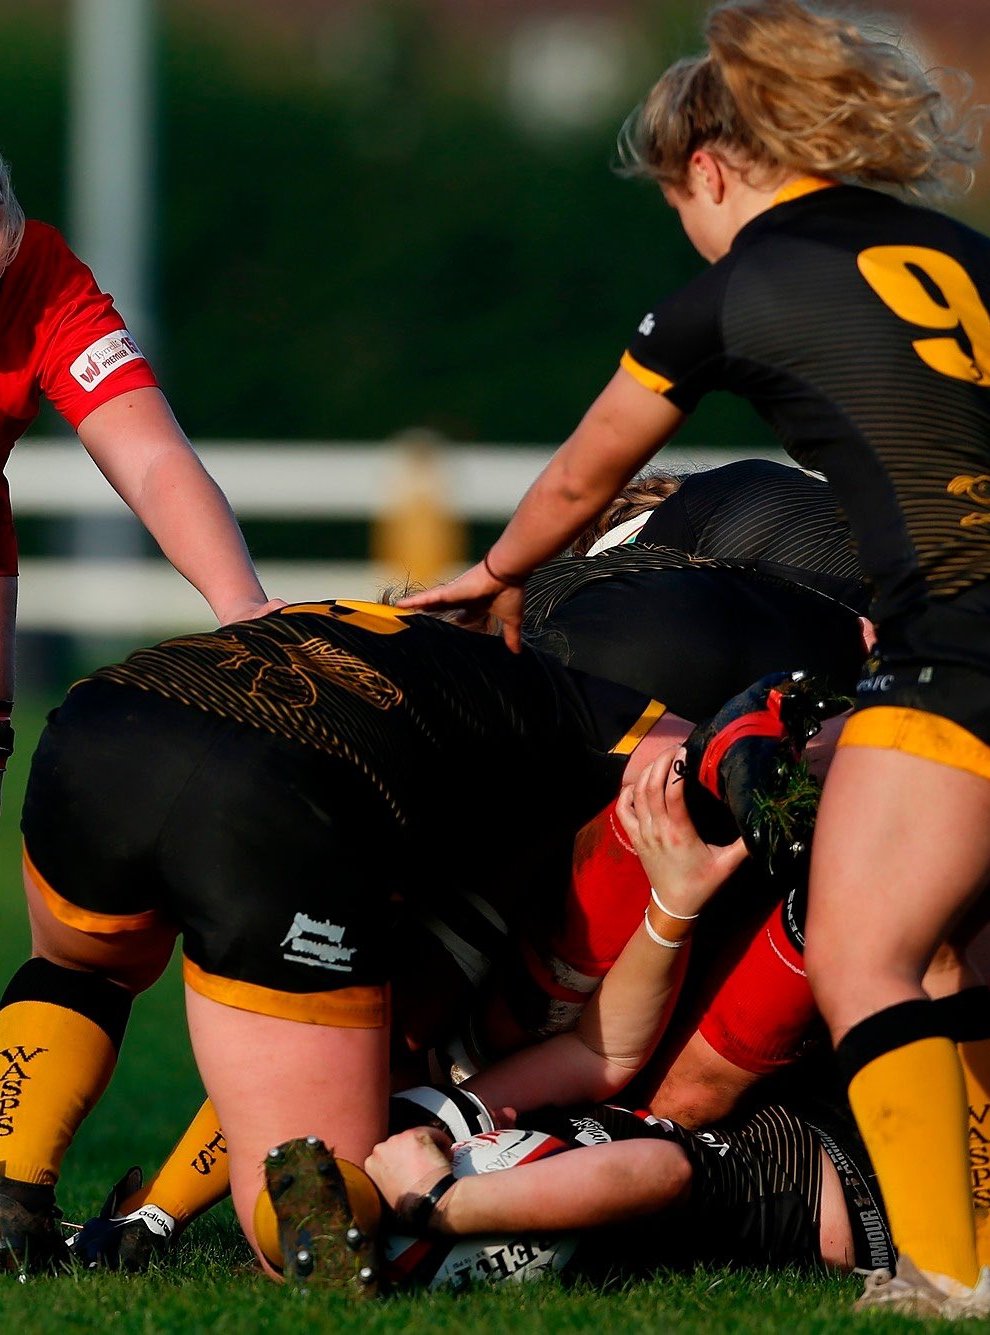 Rosie Galligan had just returned to playing after suffering from meningitis, when injury struck (Saracens )